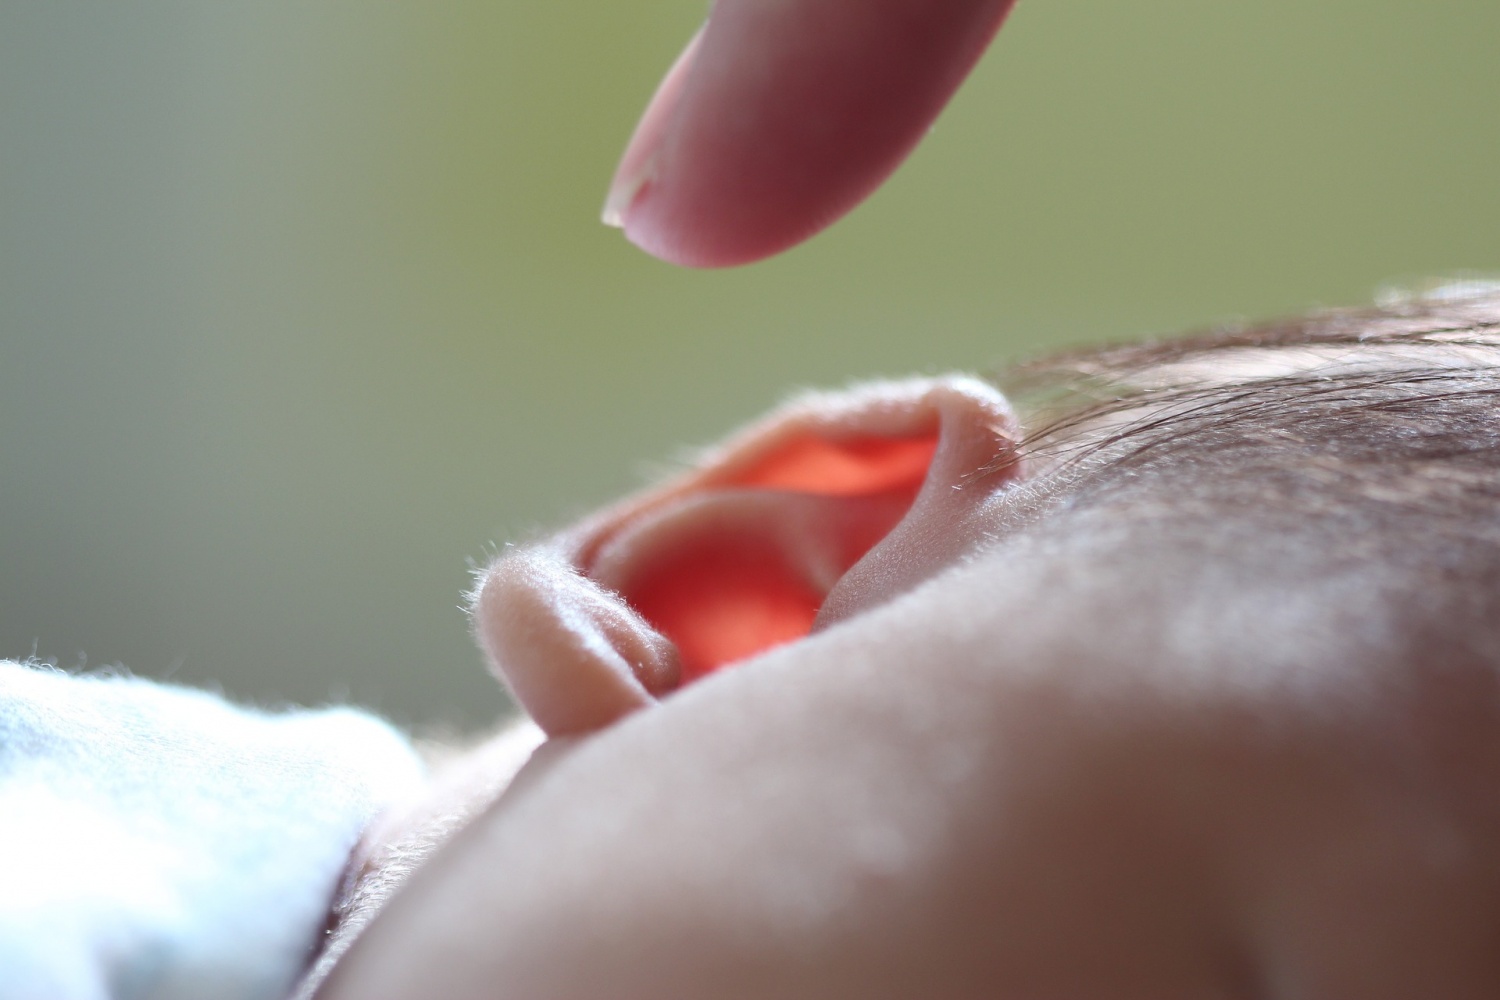 Should Parents Clean Their Child's Ears?